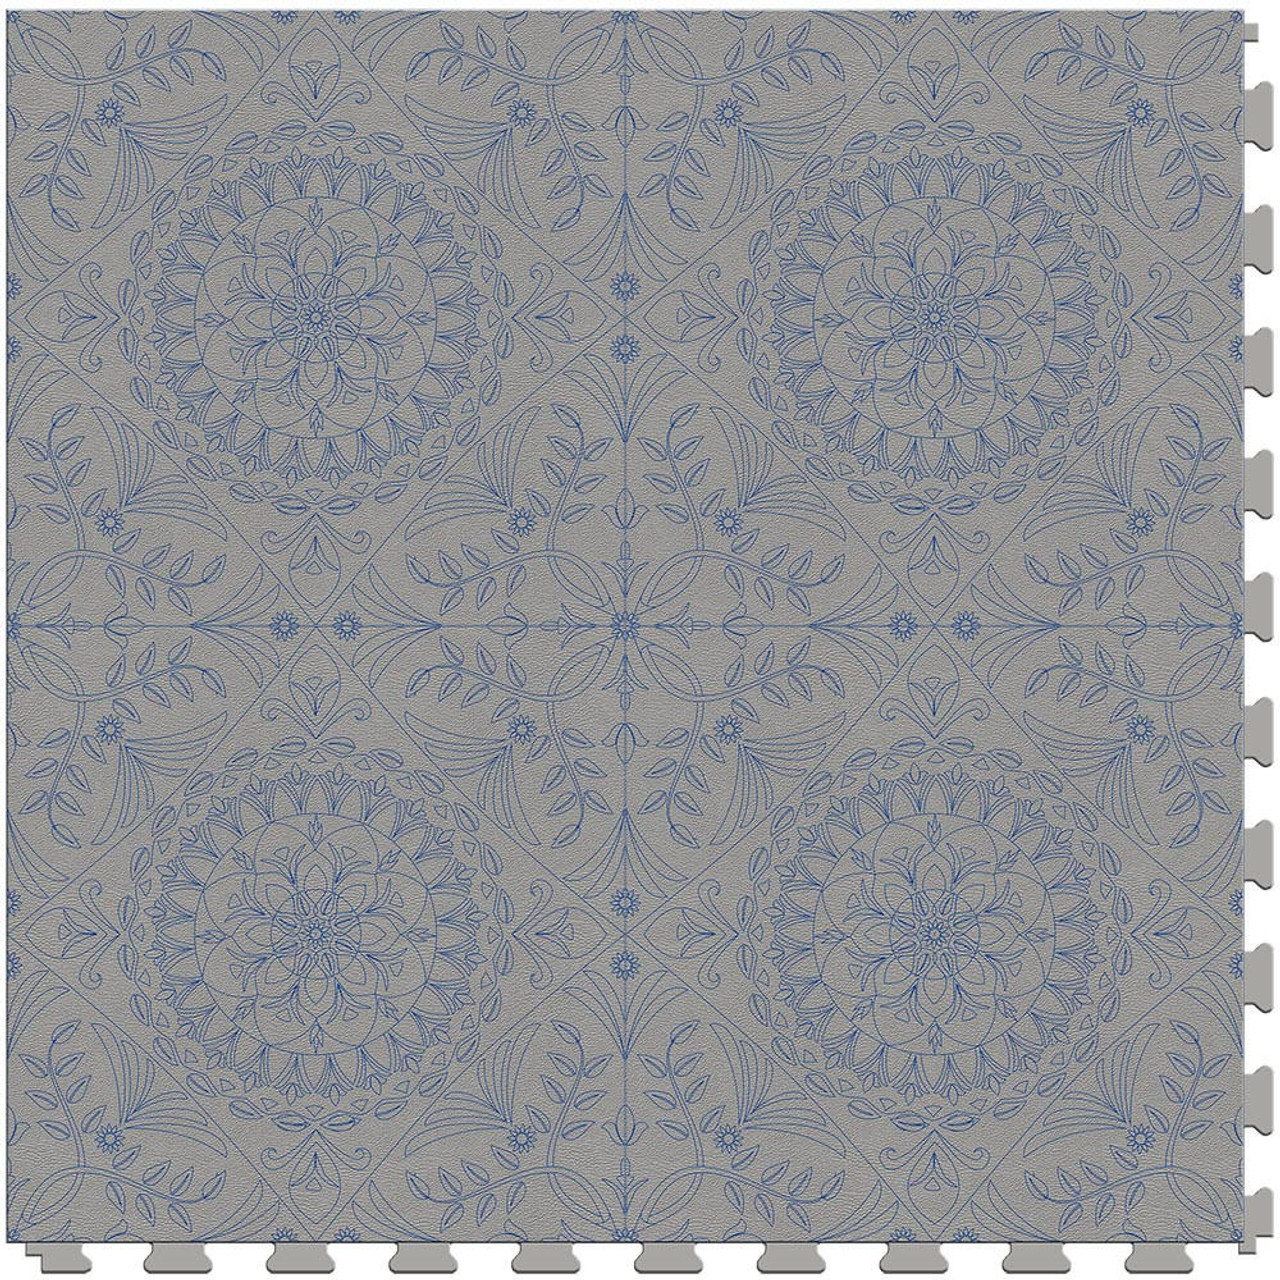 Perfection Floor Tile - Margo Collection or 6 Tiles / Case or 16.62 SQFT/ Case